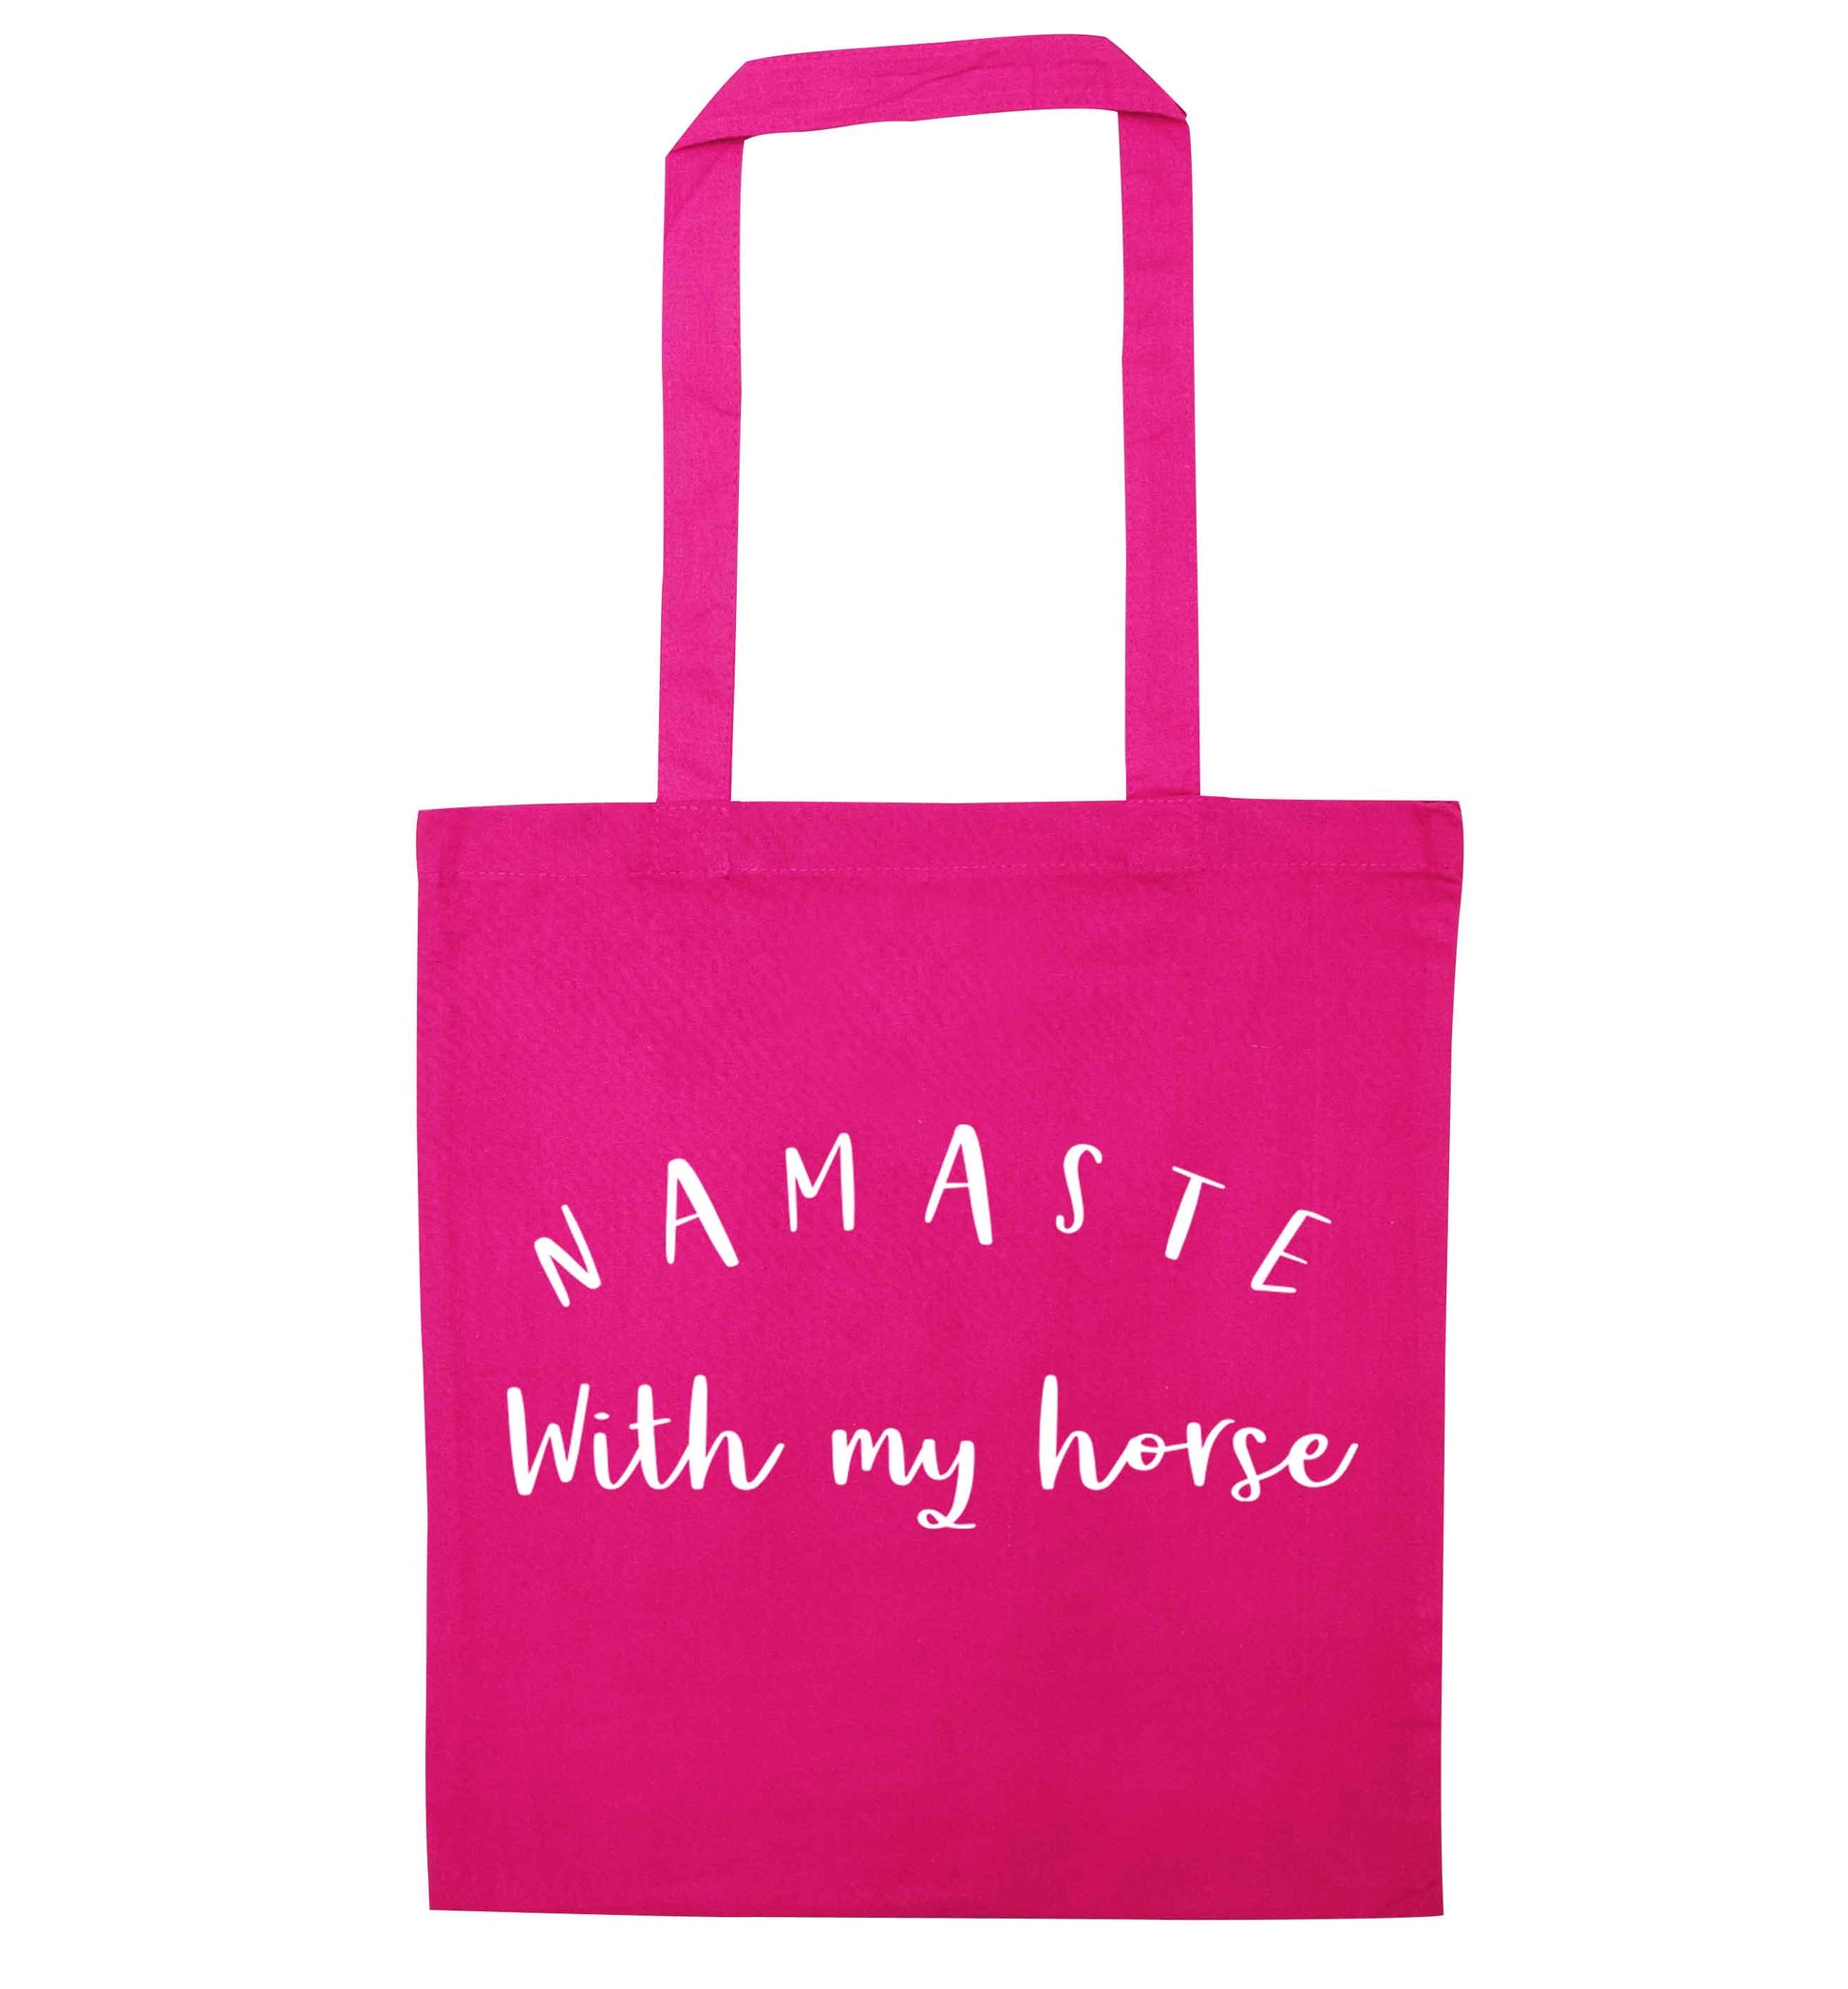 Namaste with my horse pink tote bag